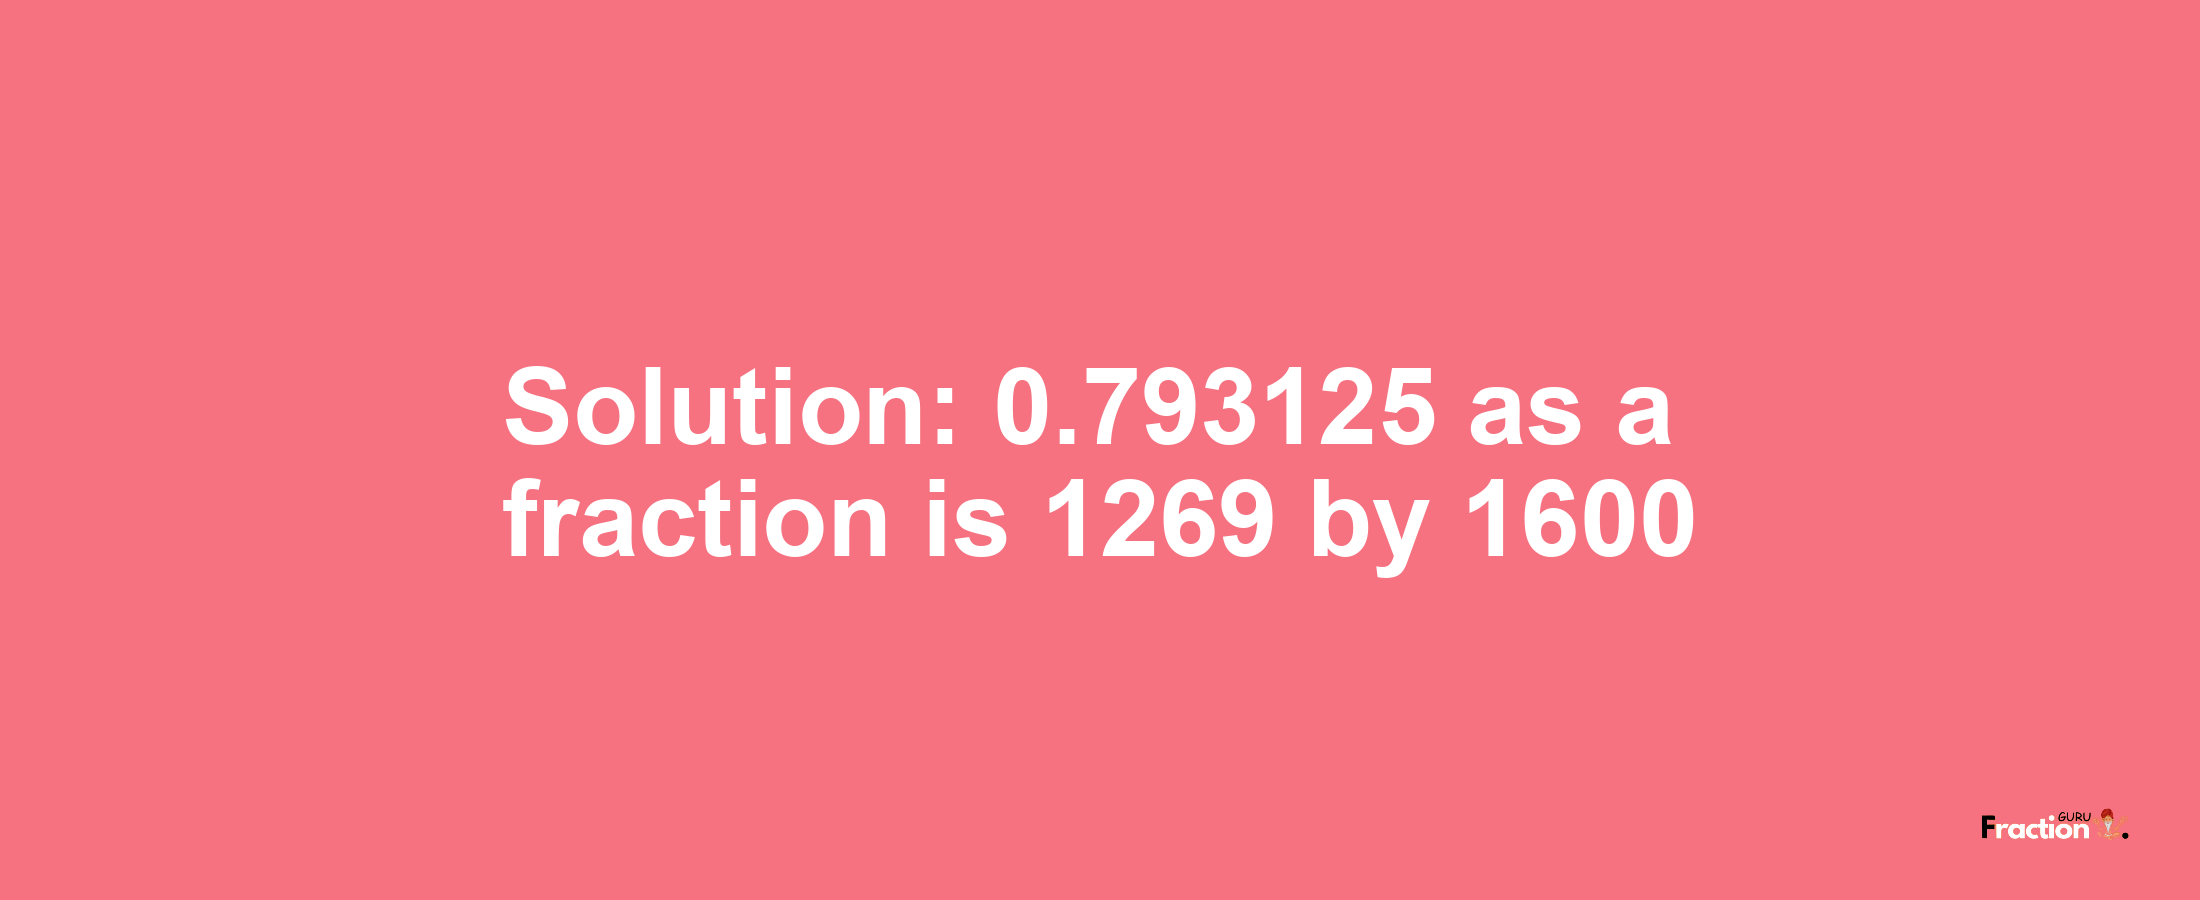 Solution:0.793125 as a fraction is 1269/1600